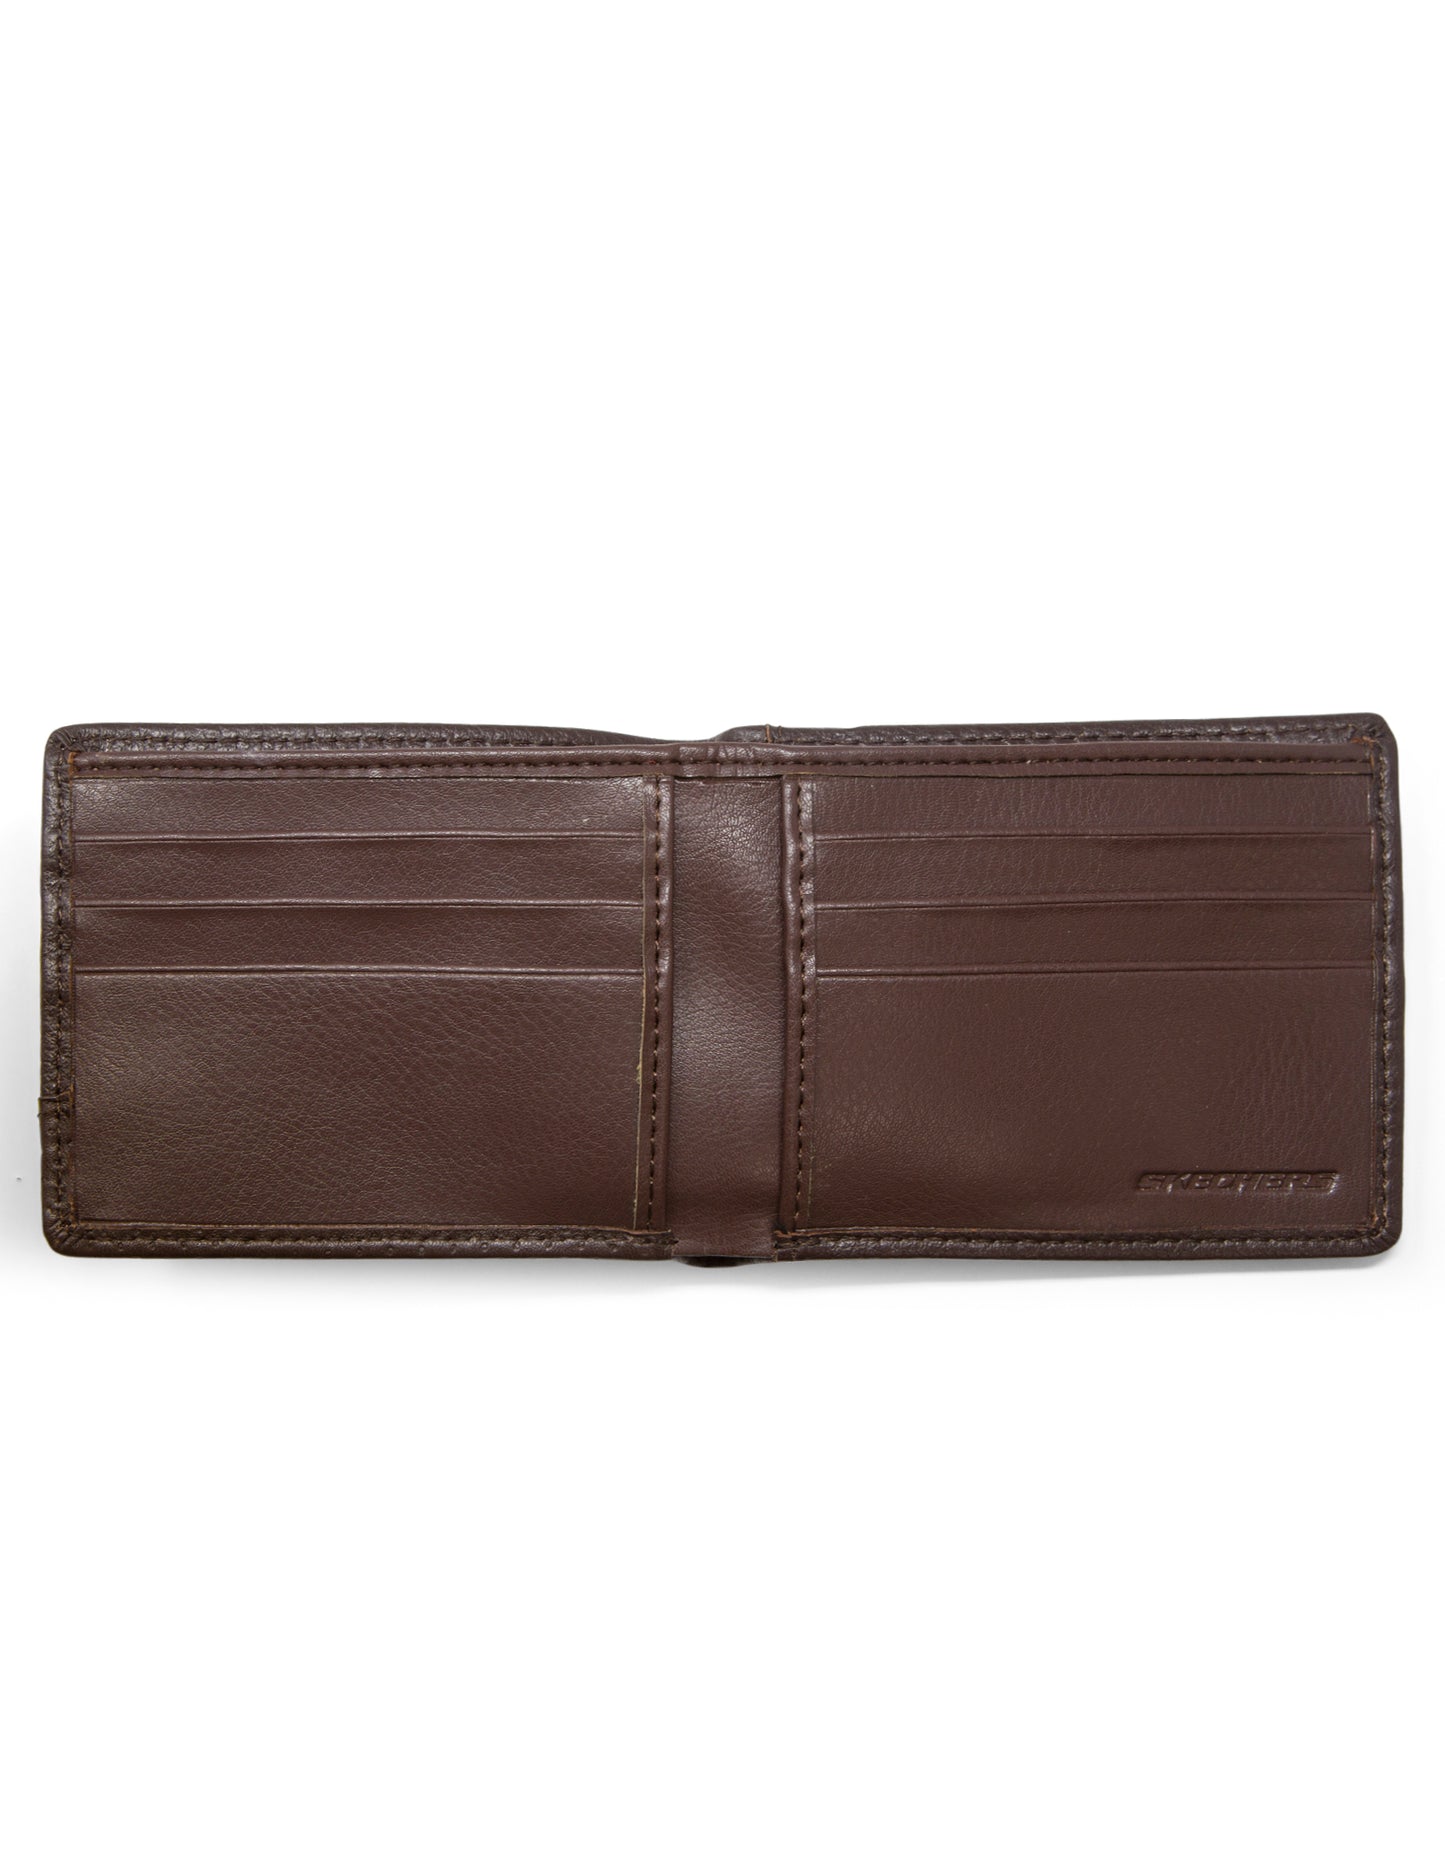 Brown wallet interior with 6 card slots, 2 slip pockets and one cash compartment